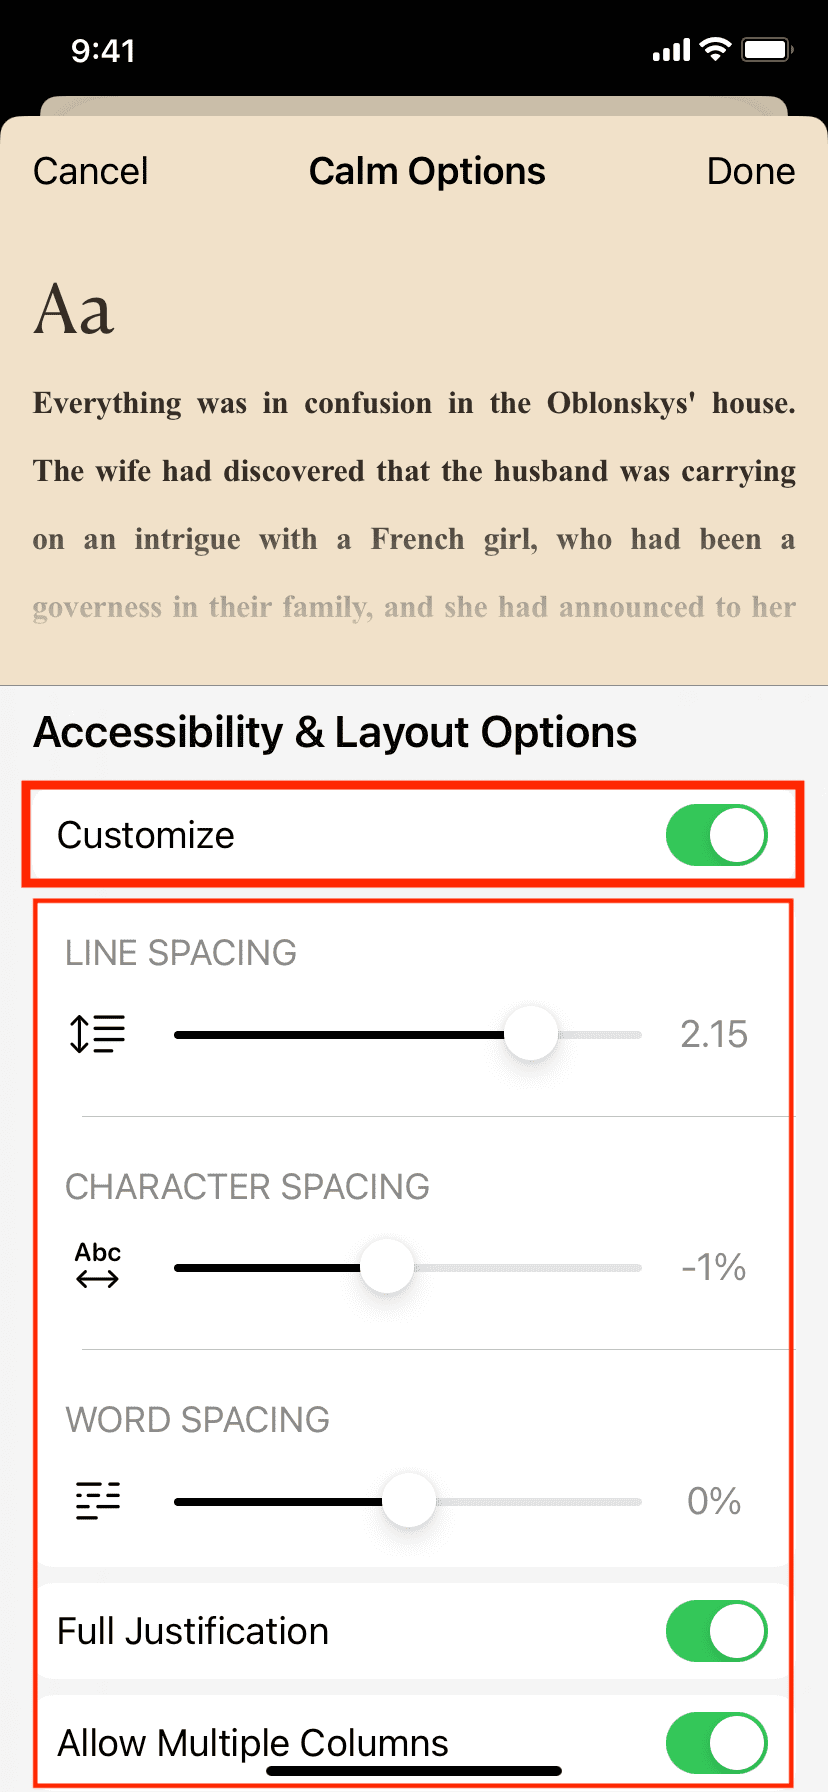 Accessibility and Layout Options for theme in iPhone Books app